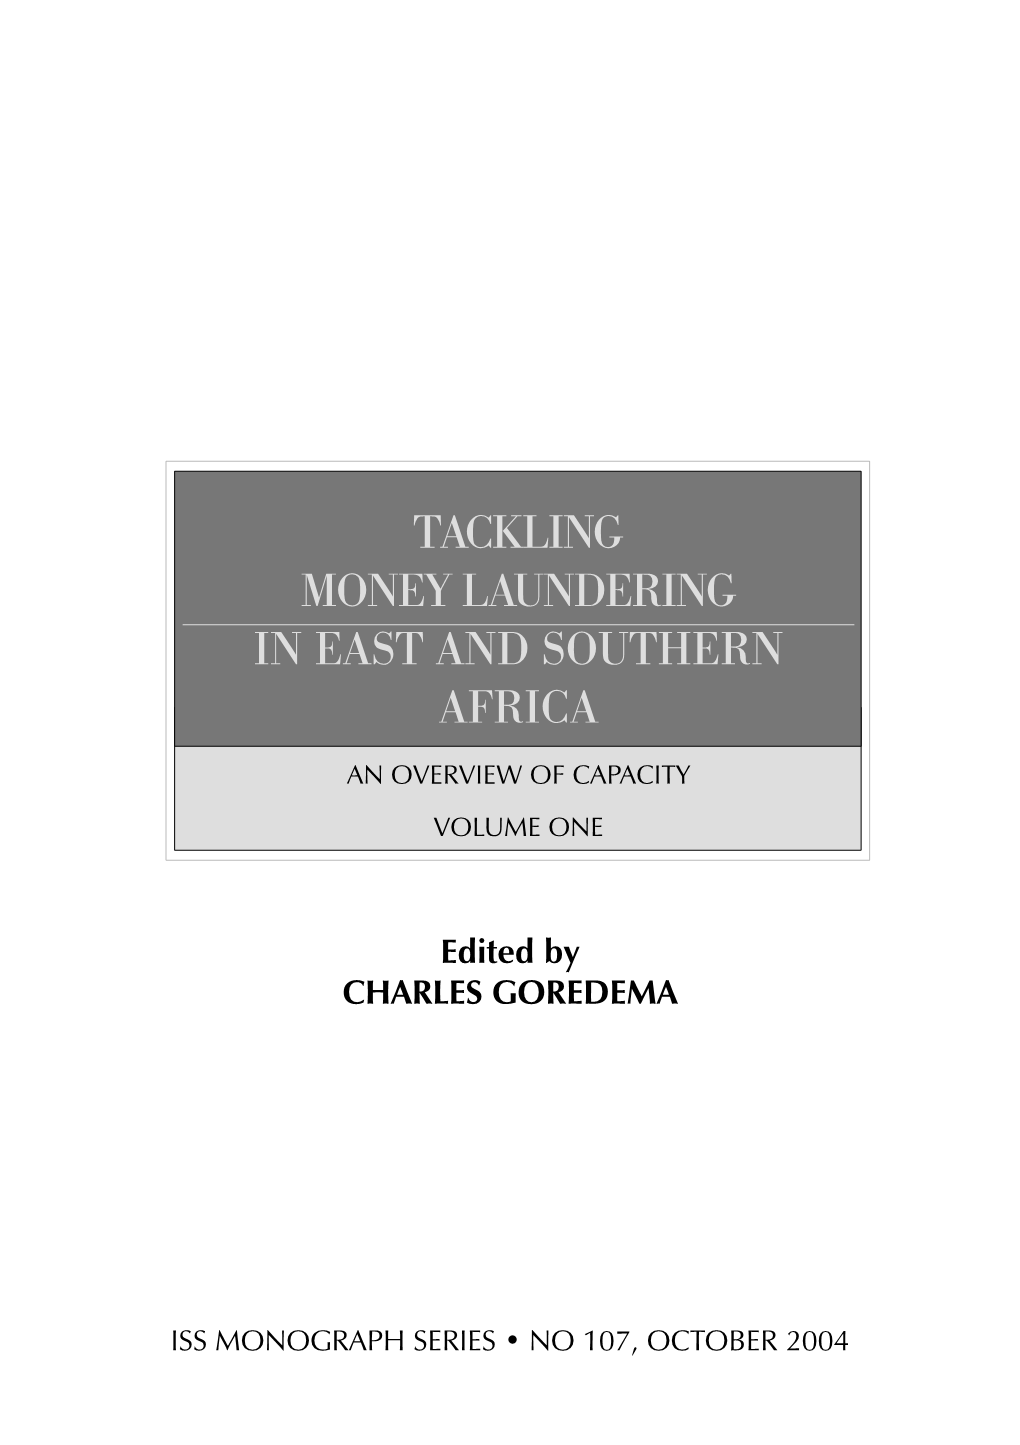 Tackling Money Laundering in East and Southern Africa